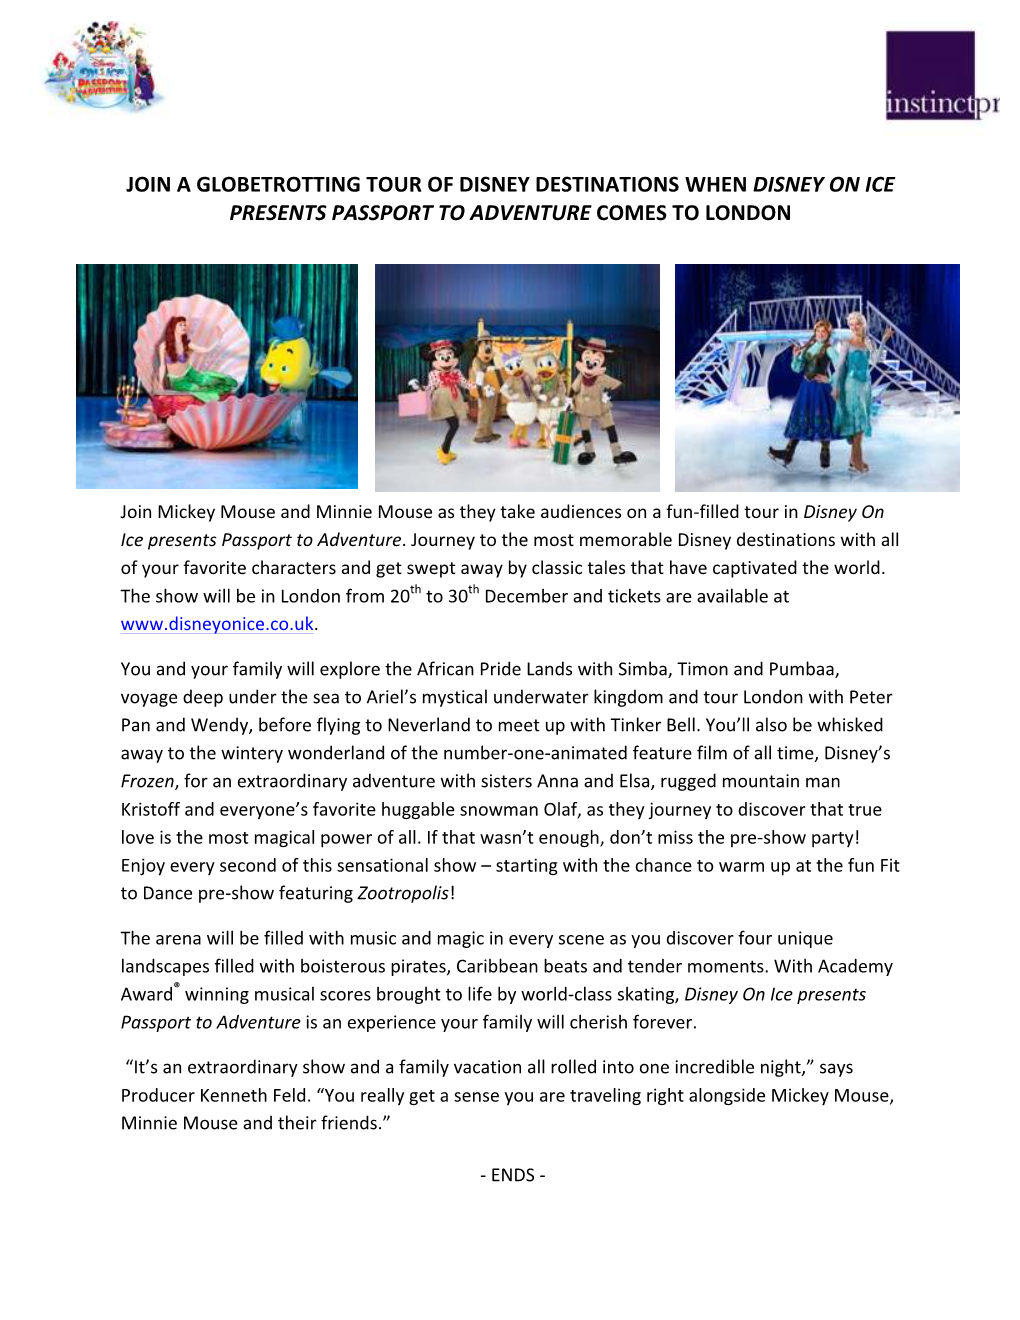 Join a Globetrotting Tour of Disney Destinations When Disney on Ice Presents Passport to Adventure Comes to London